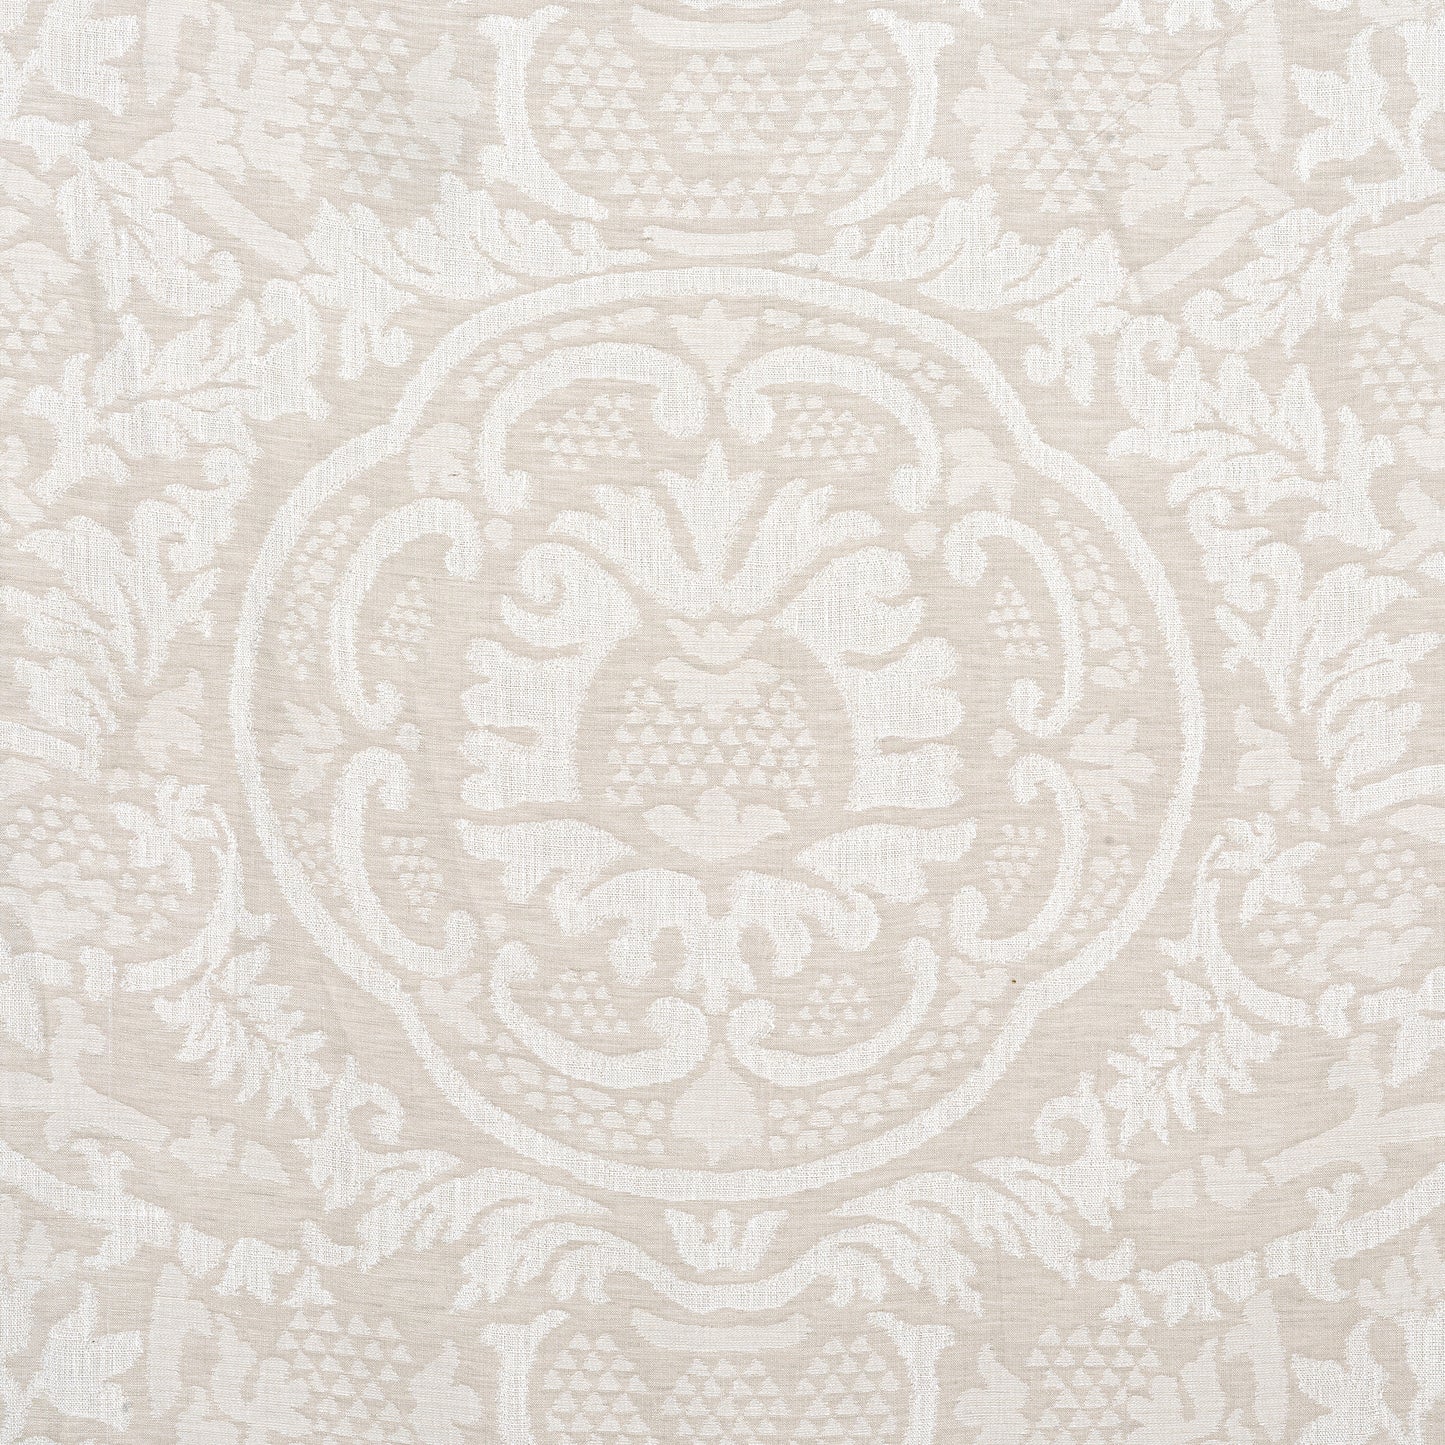 Purchase Thibaut Fabric SKU W710841 pattern name Earl Damask color Flax